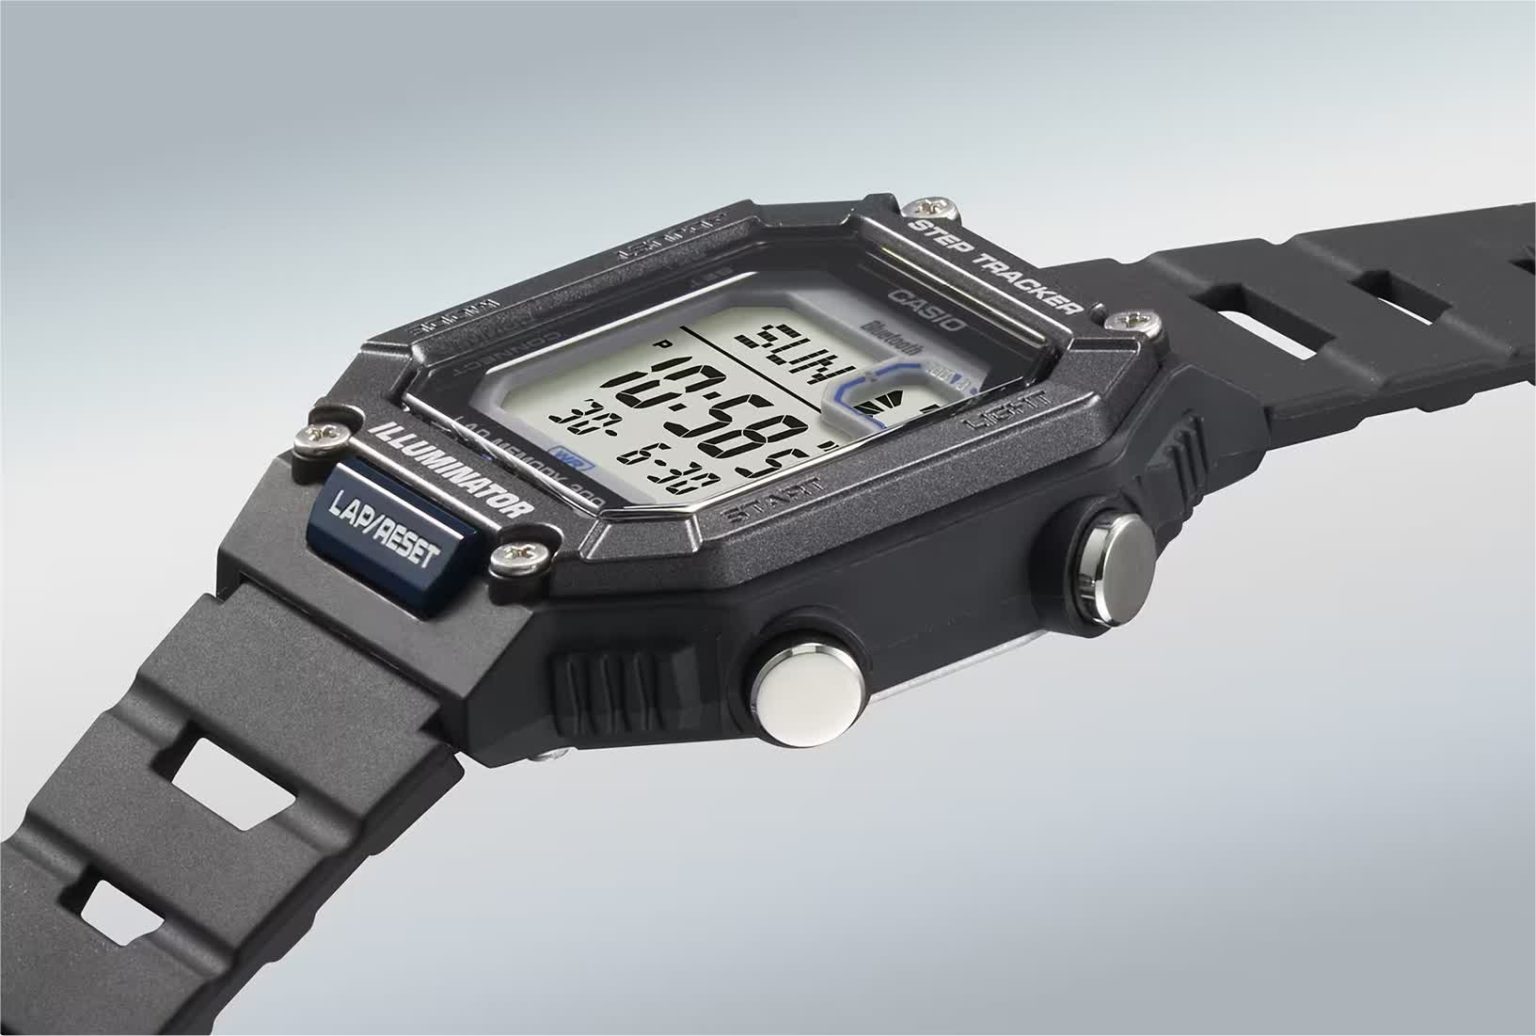 Casio baked a step tracker into this retro wristwatch